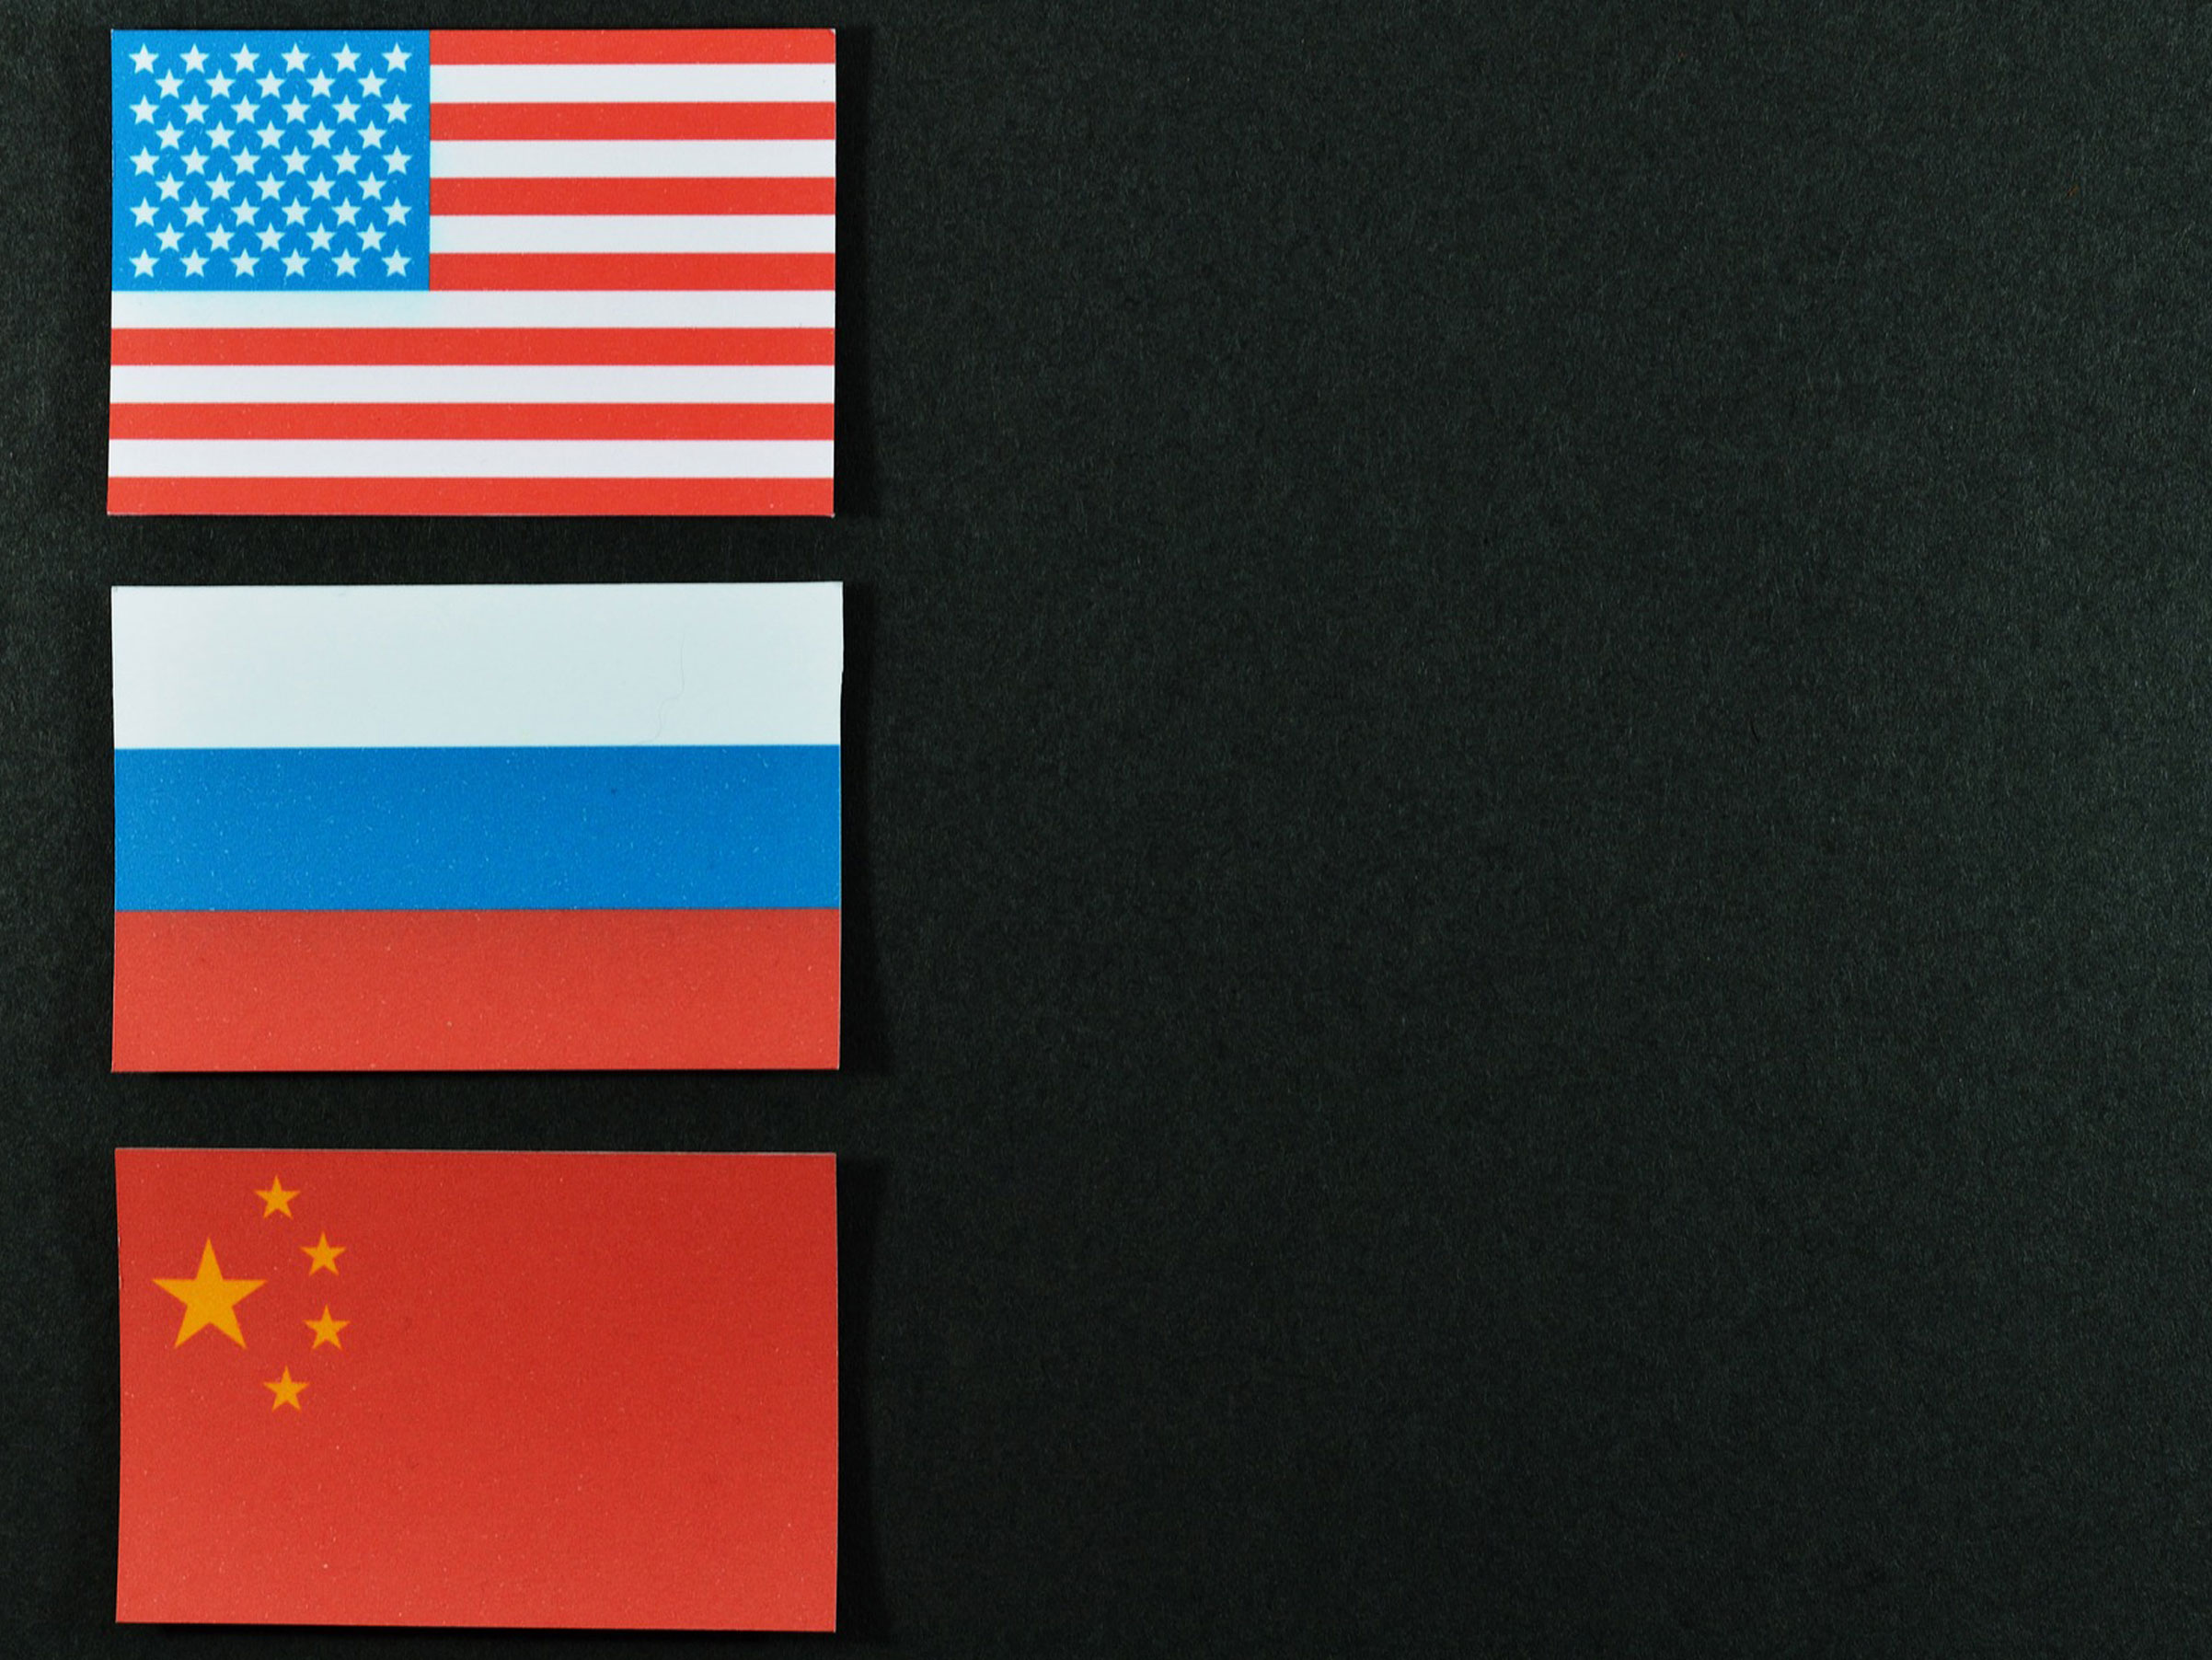 US-China Relations in Light of the Ukraine War